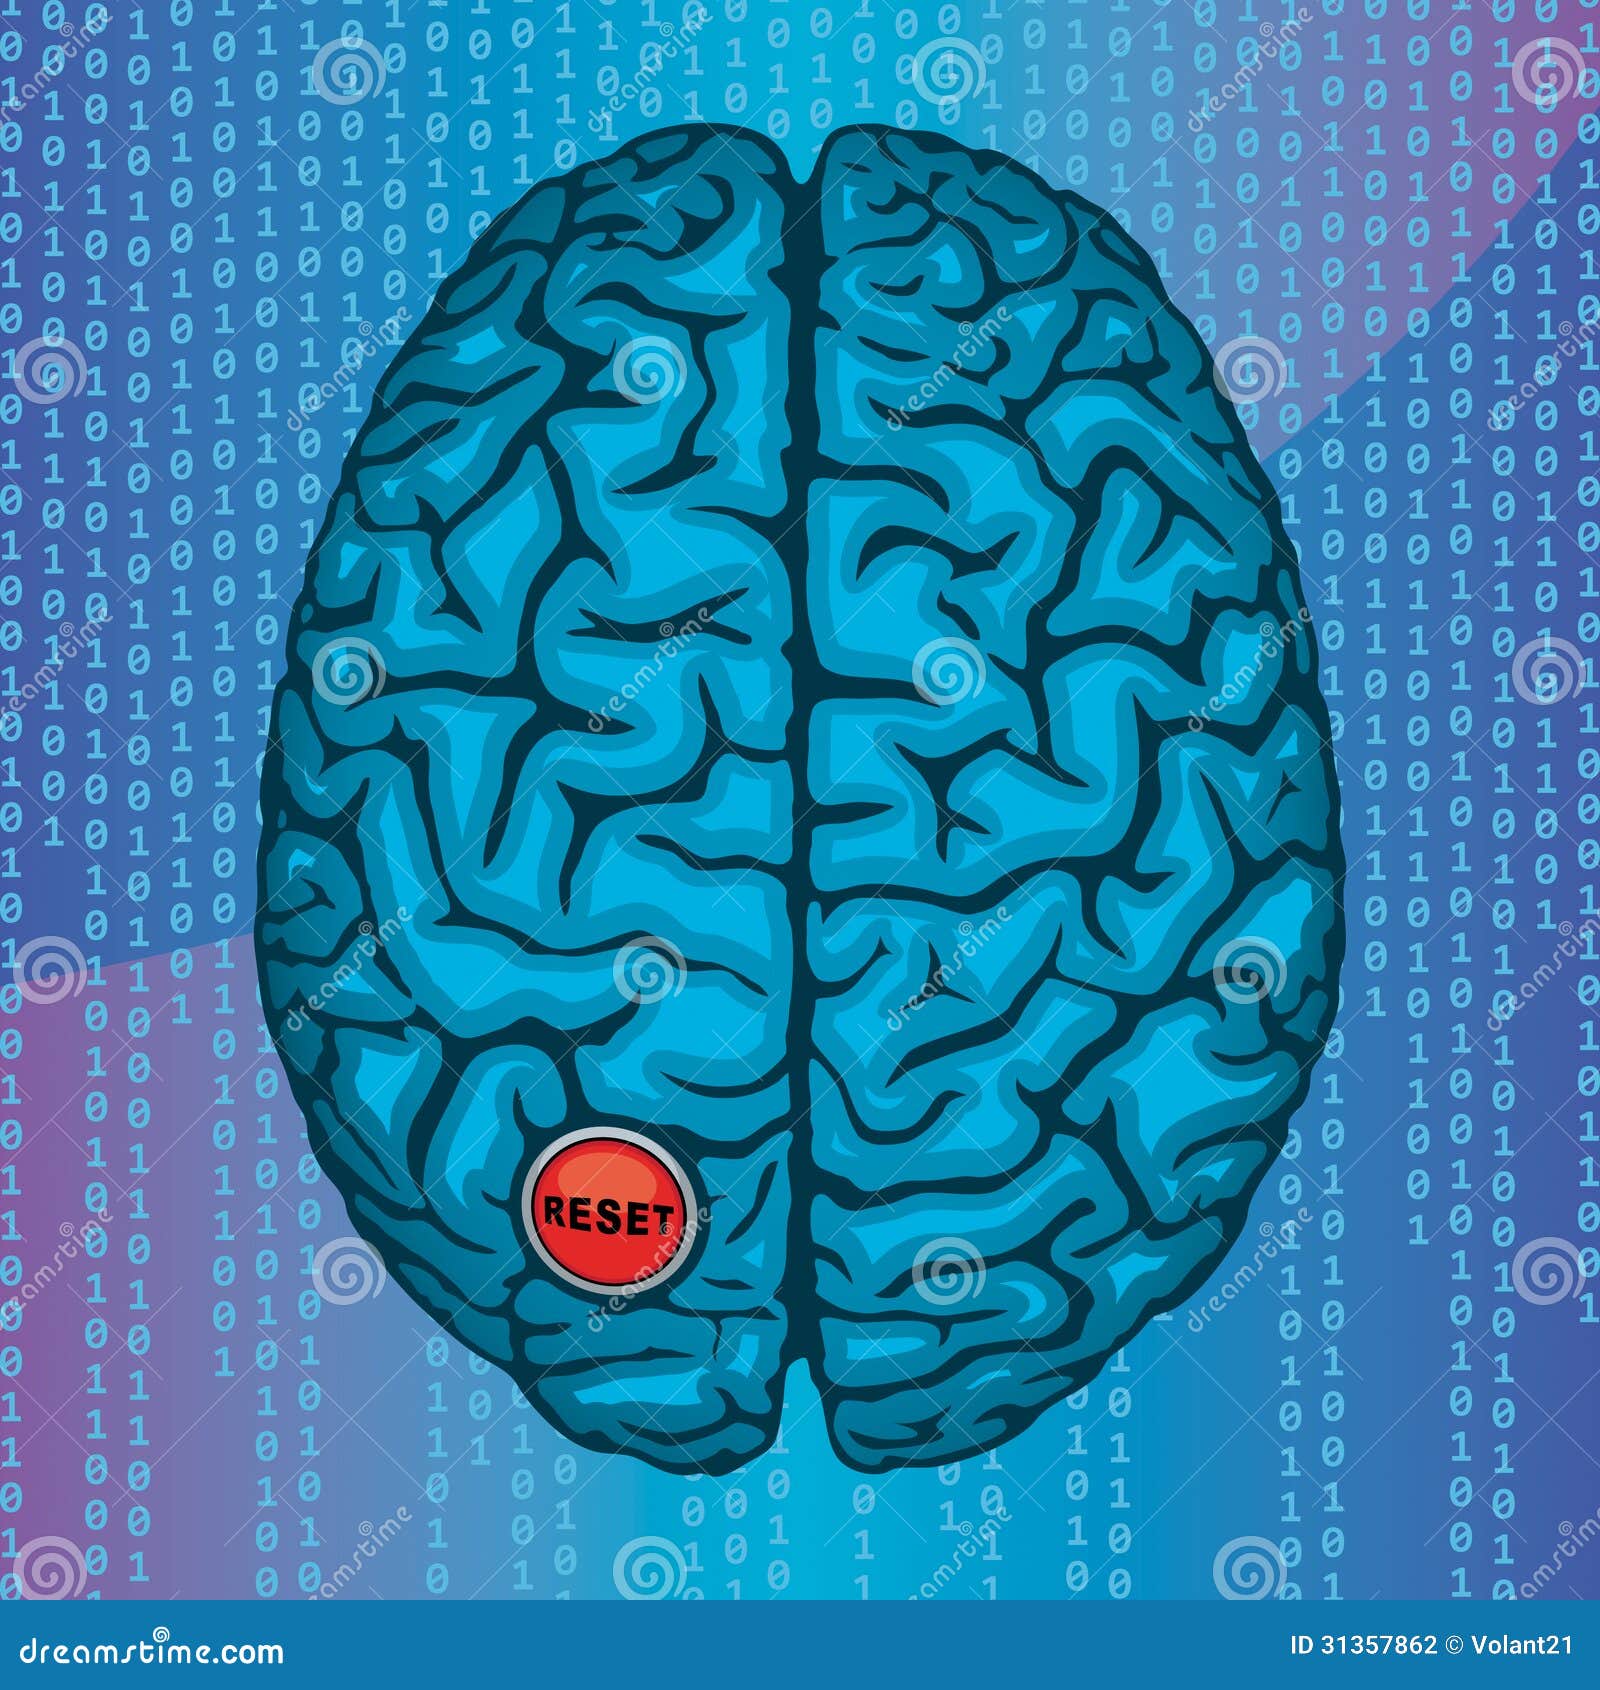 Reset your brain stock vector. Illustration of concept ...